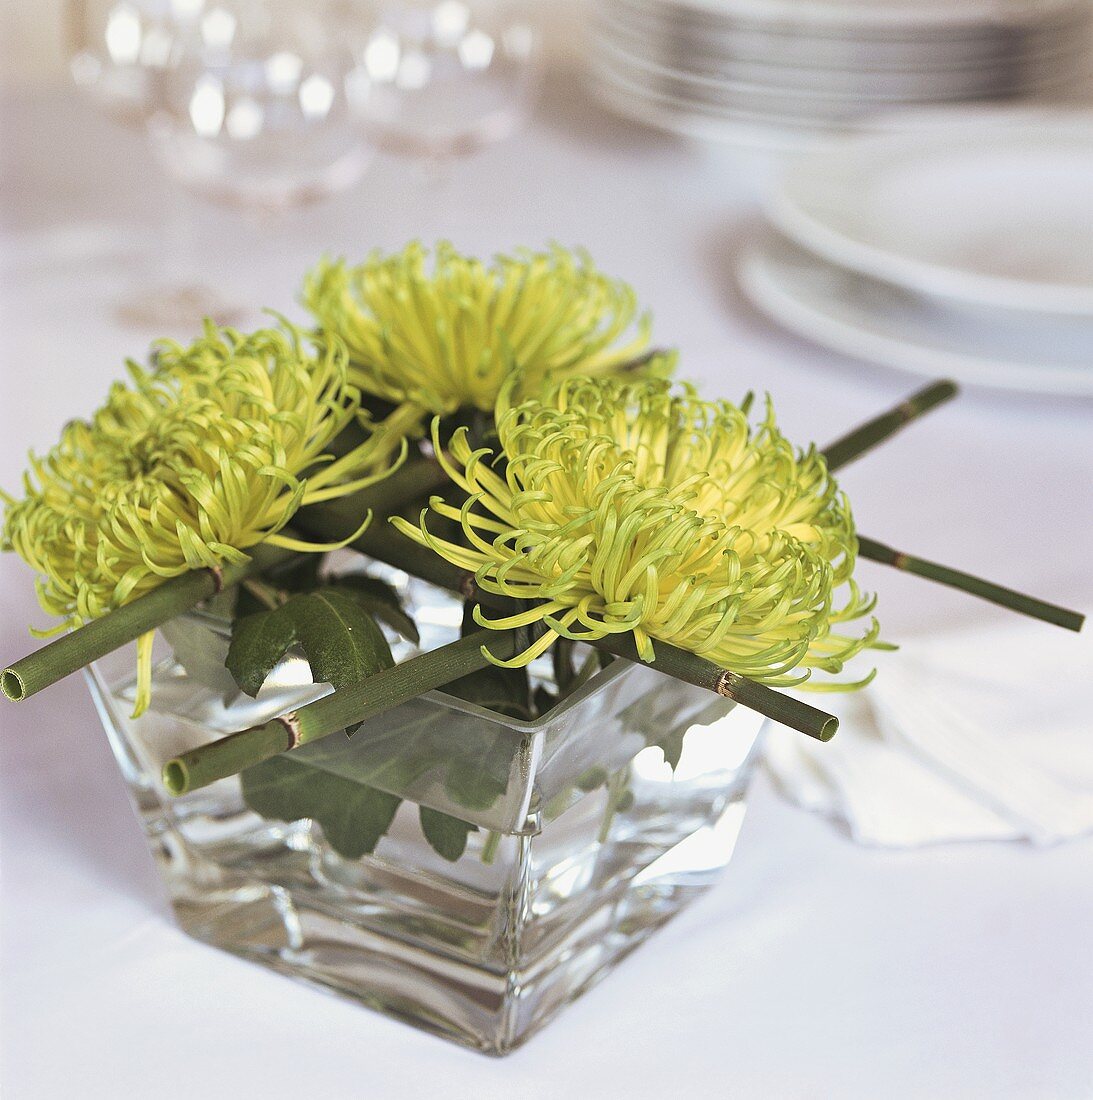 Green chrysanthemums in glass of water as table decoration